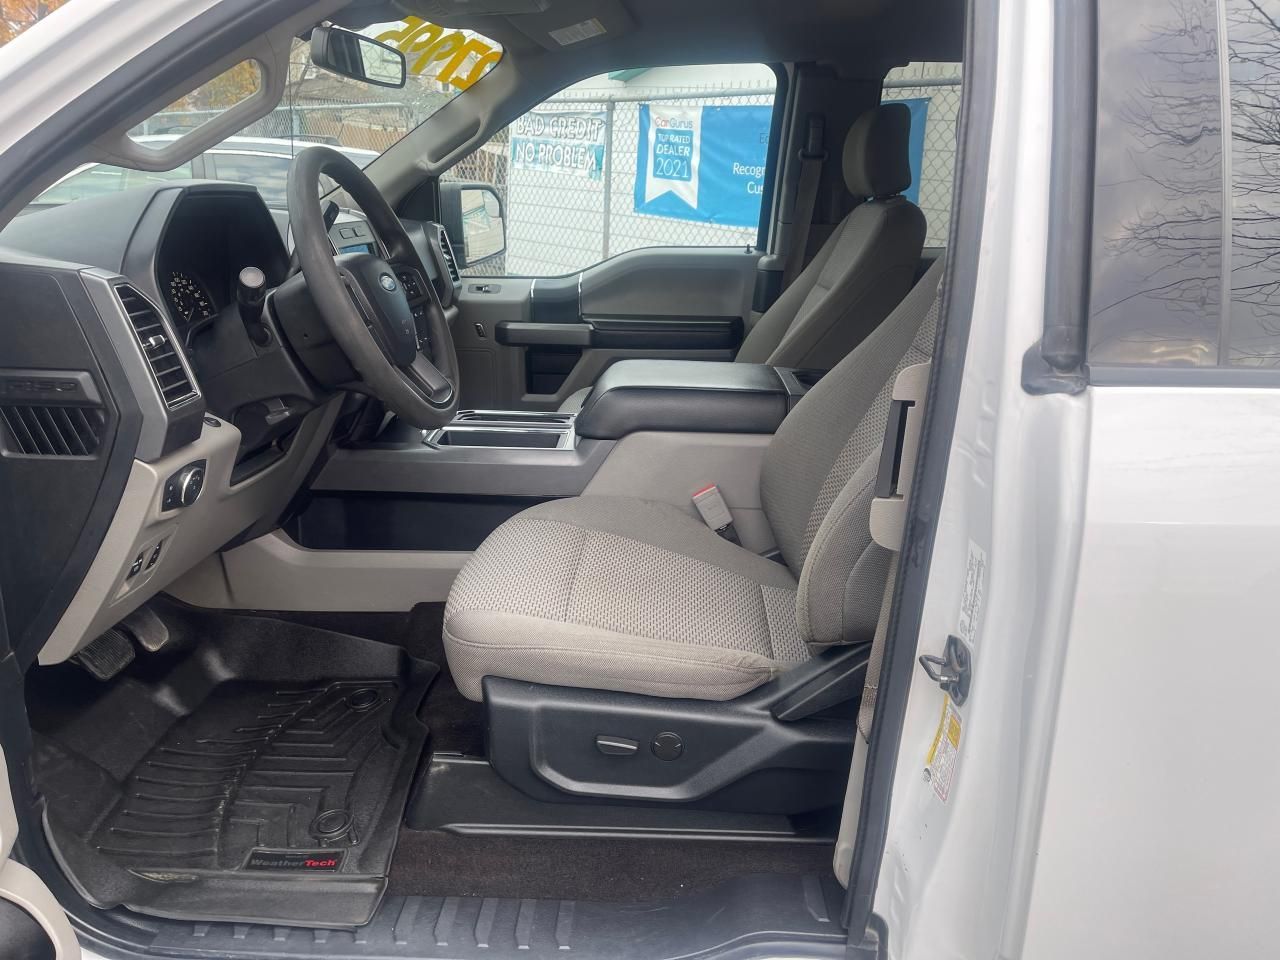 2020 Ford F-150 XLT, Ext. Cab. 4X4, P. Seat, Center console